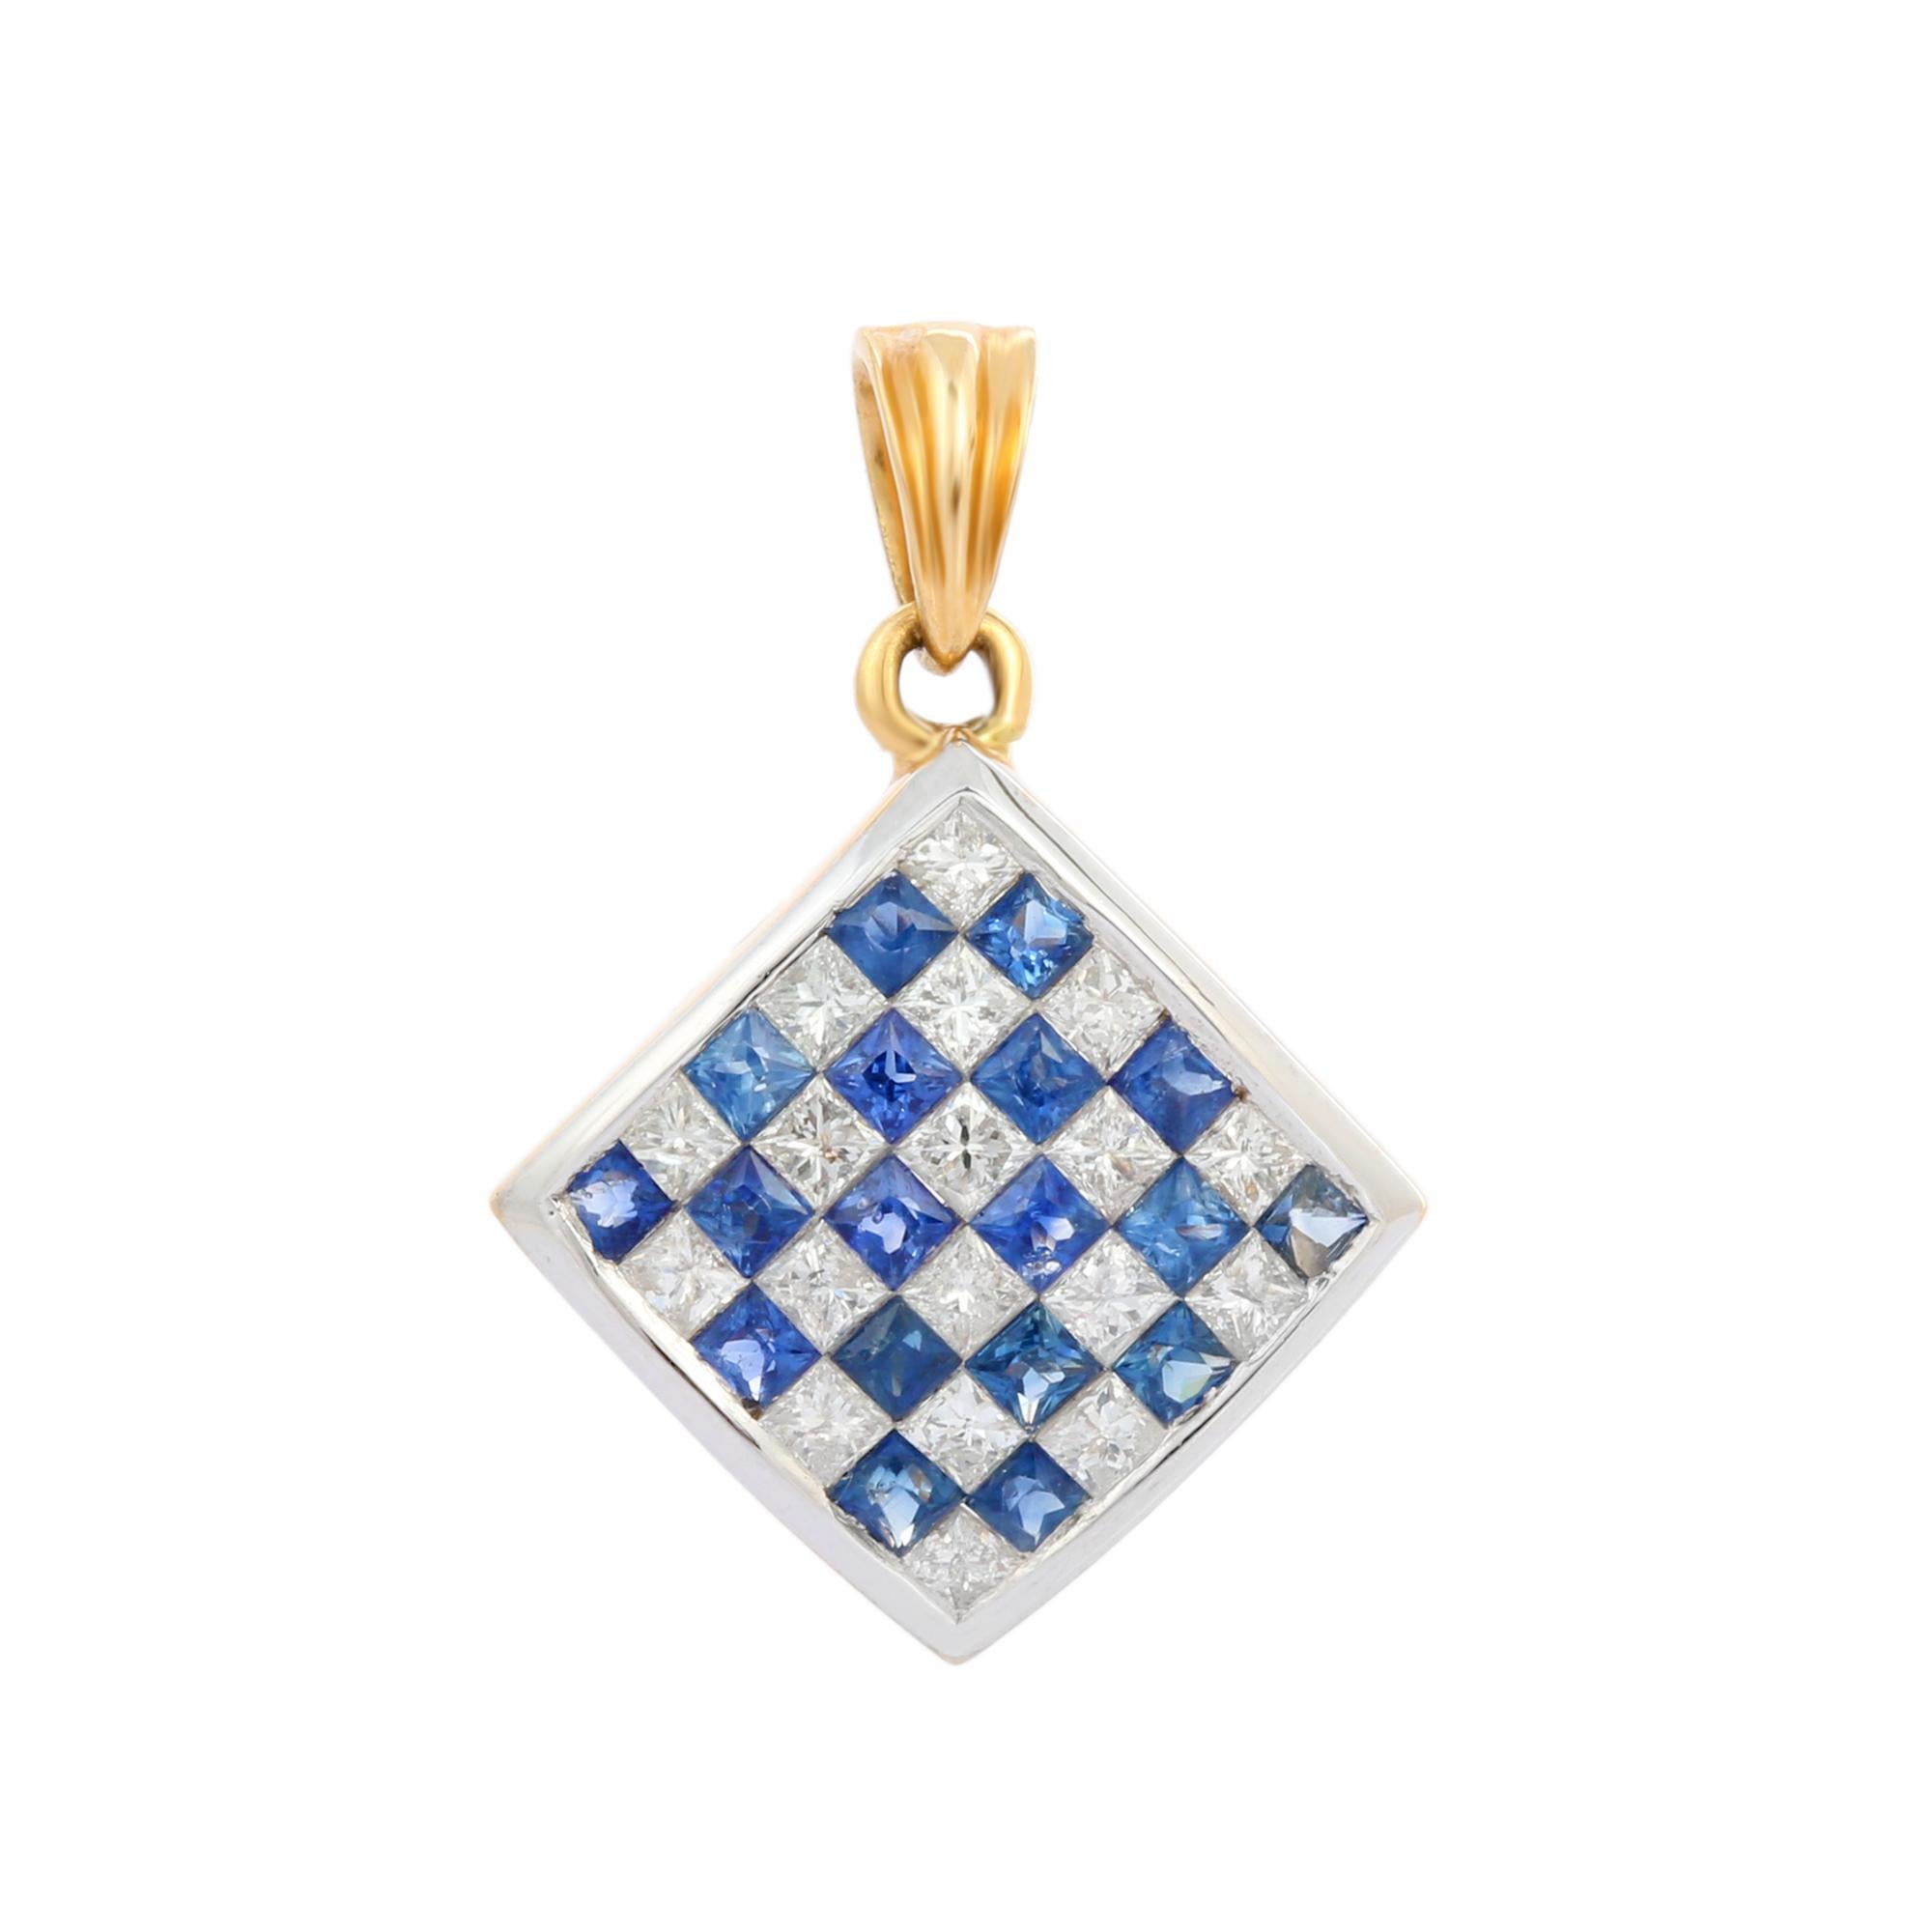 Natural Blue Sapphire Square Shape pendant in 18K Gold. It has square cut sapphires and diamonds that completes your look with a decent touch. Pendants are used to wear or gifted to represent love and promises. It's an attractive jewelry piece that